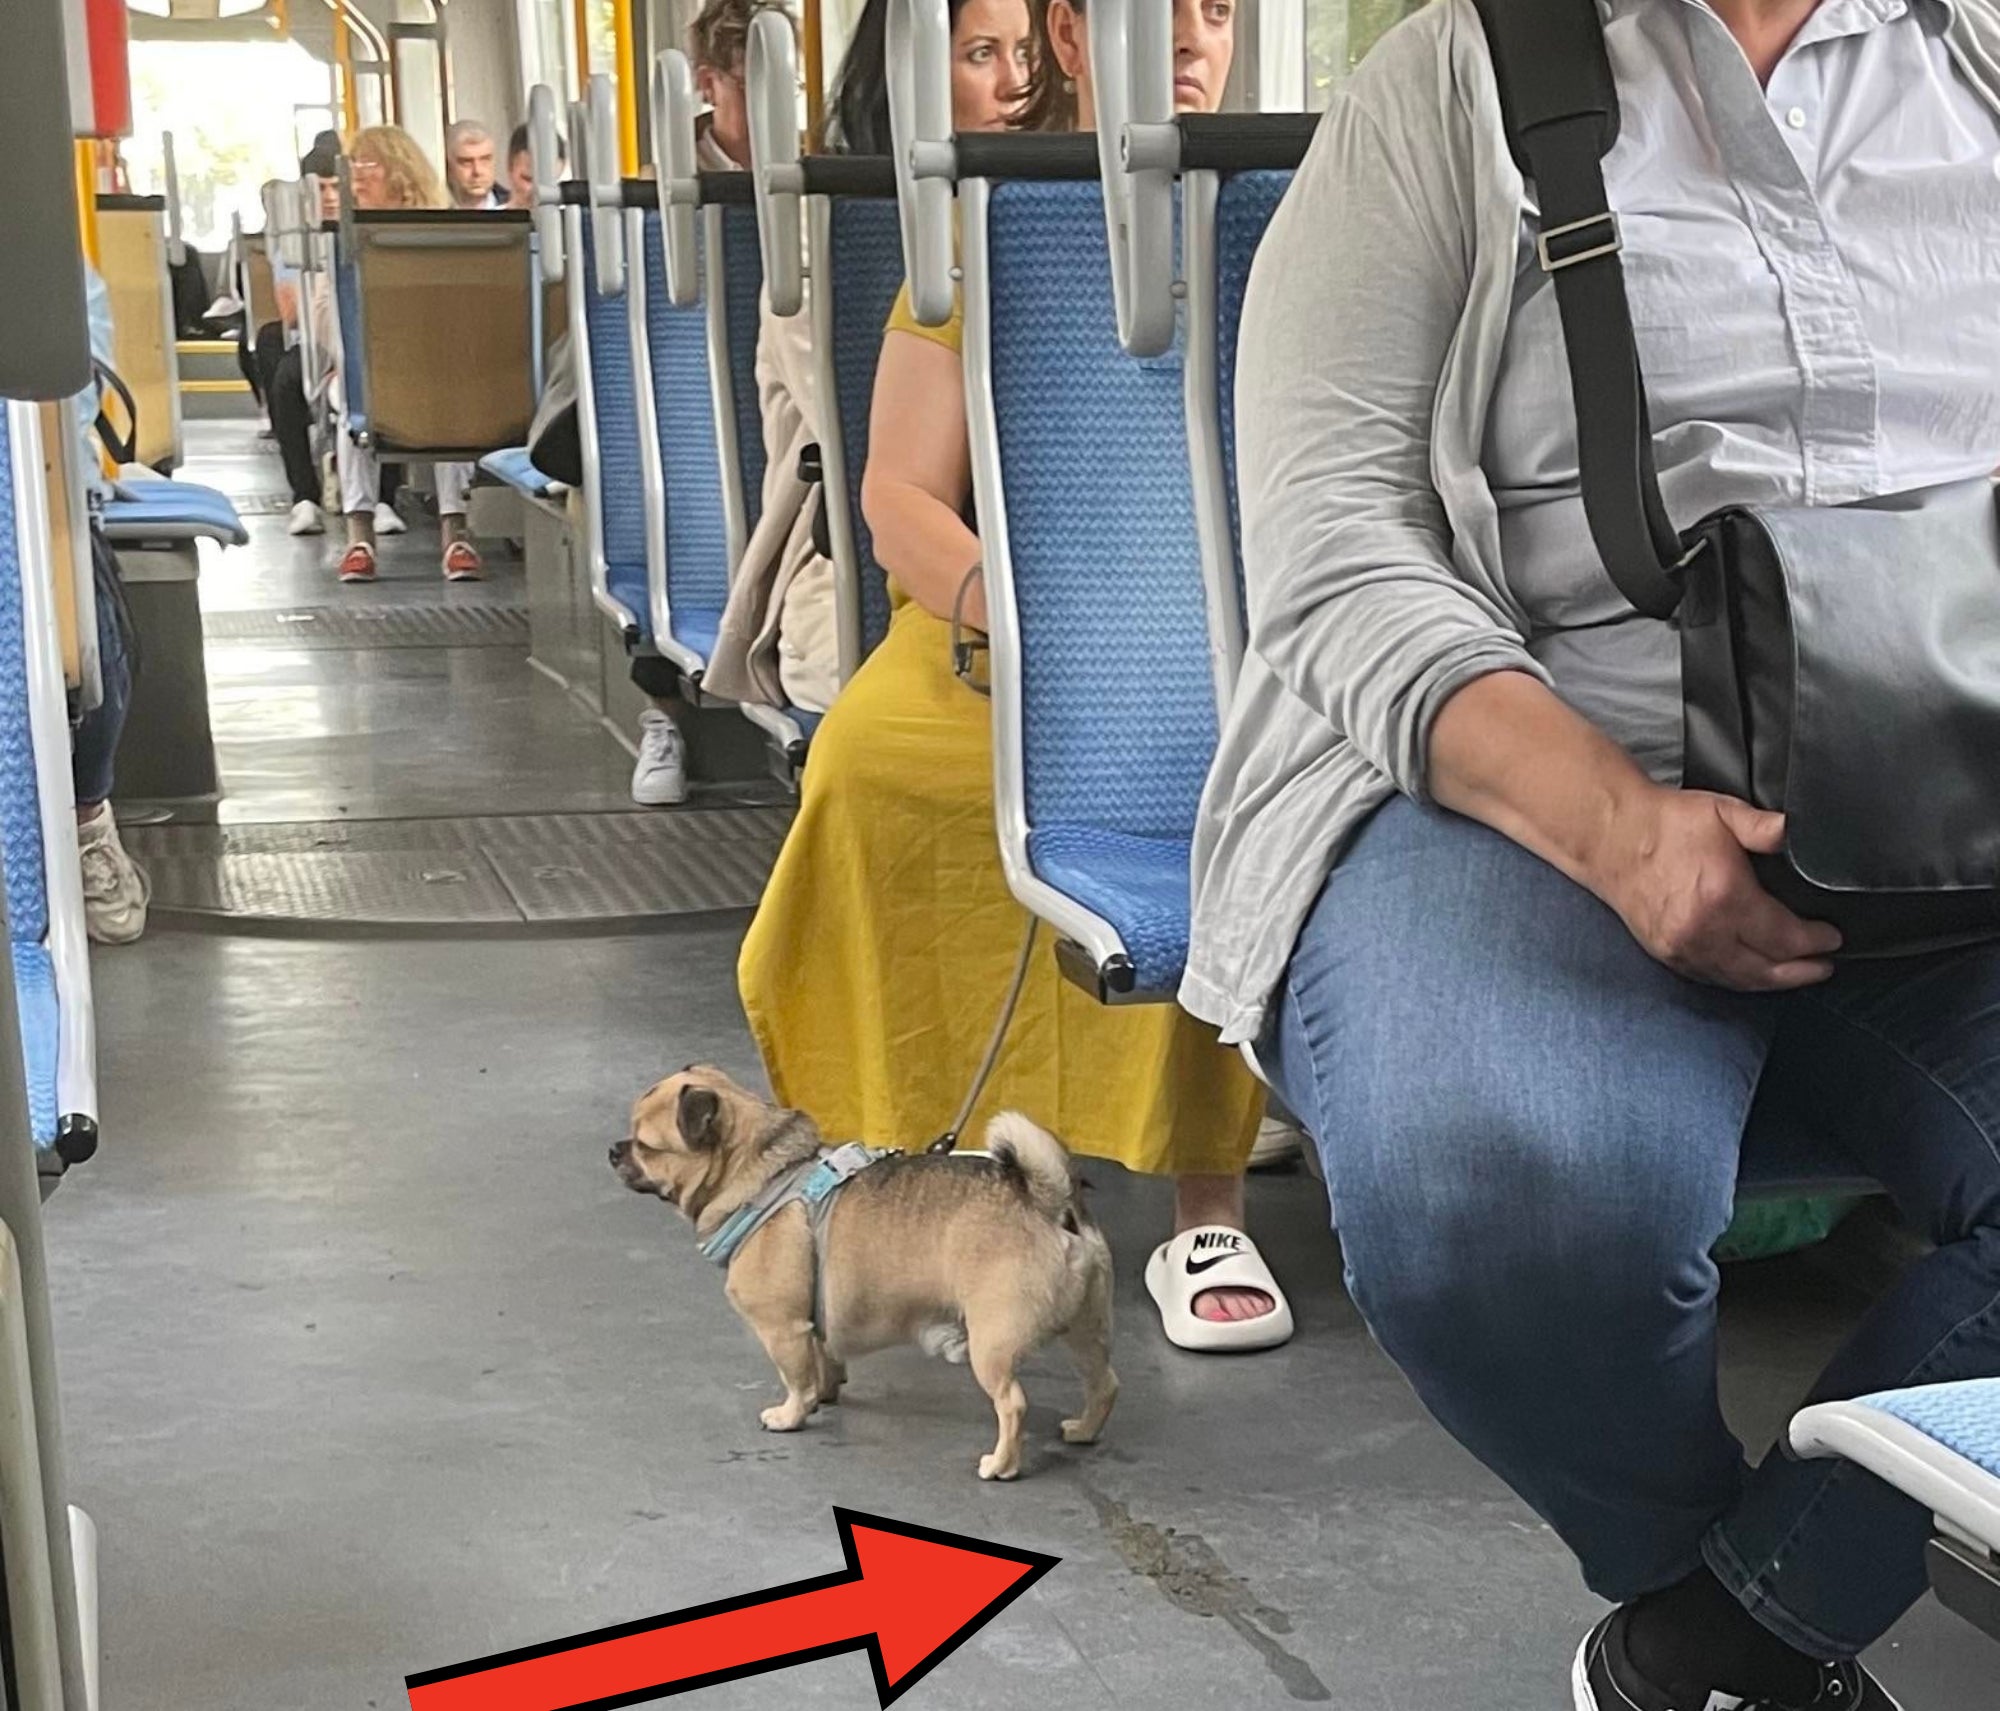 A dog peeing on the bus